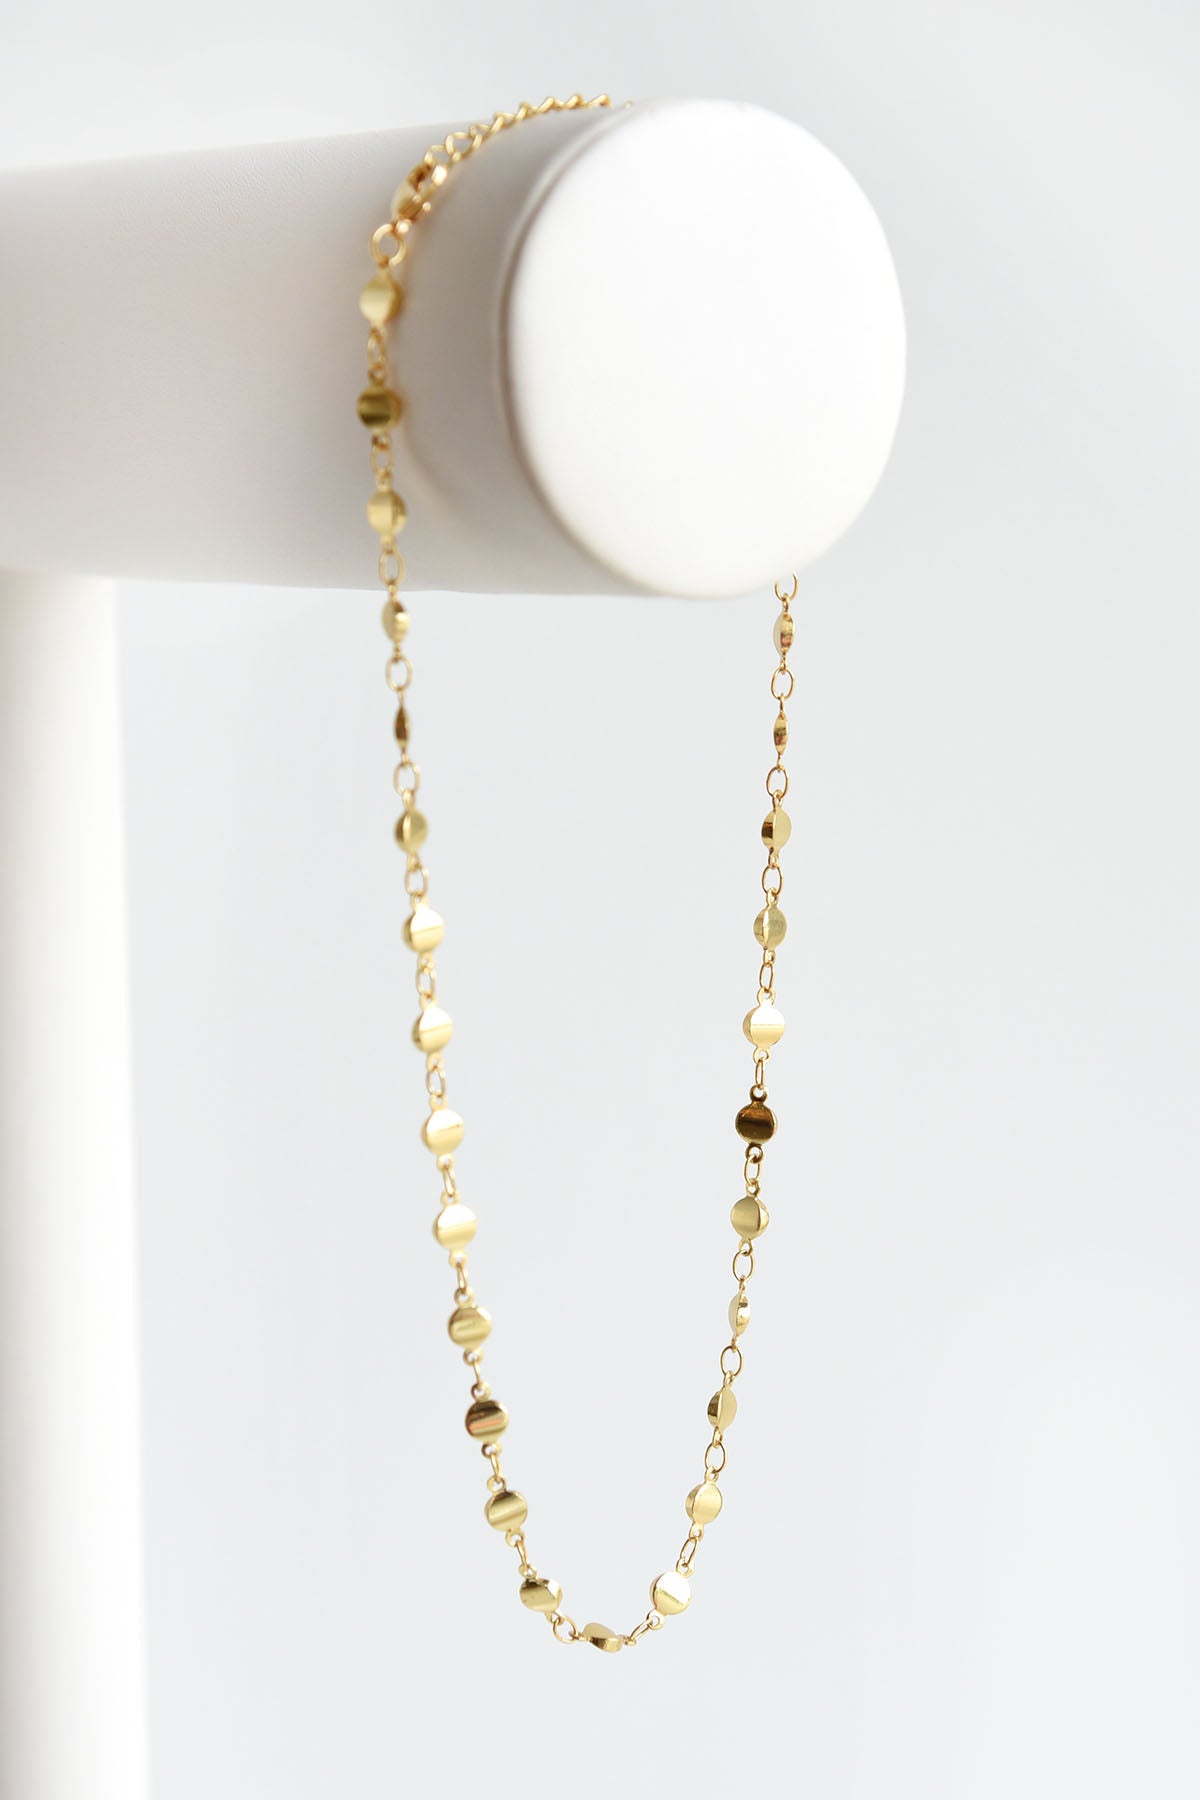 GOLD DAINTY NECKLACE